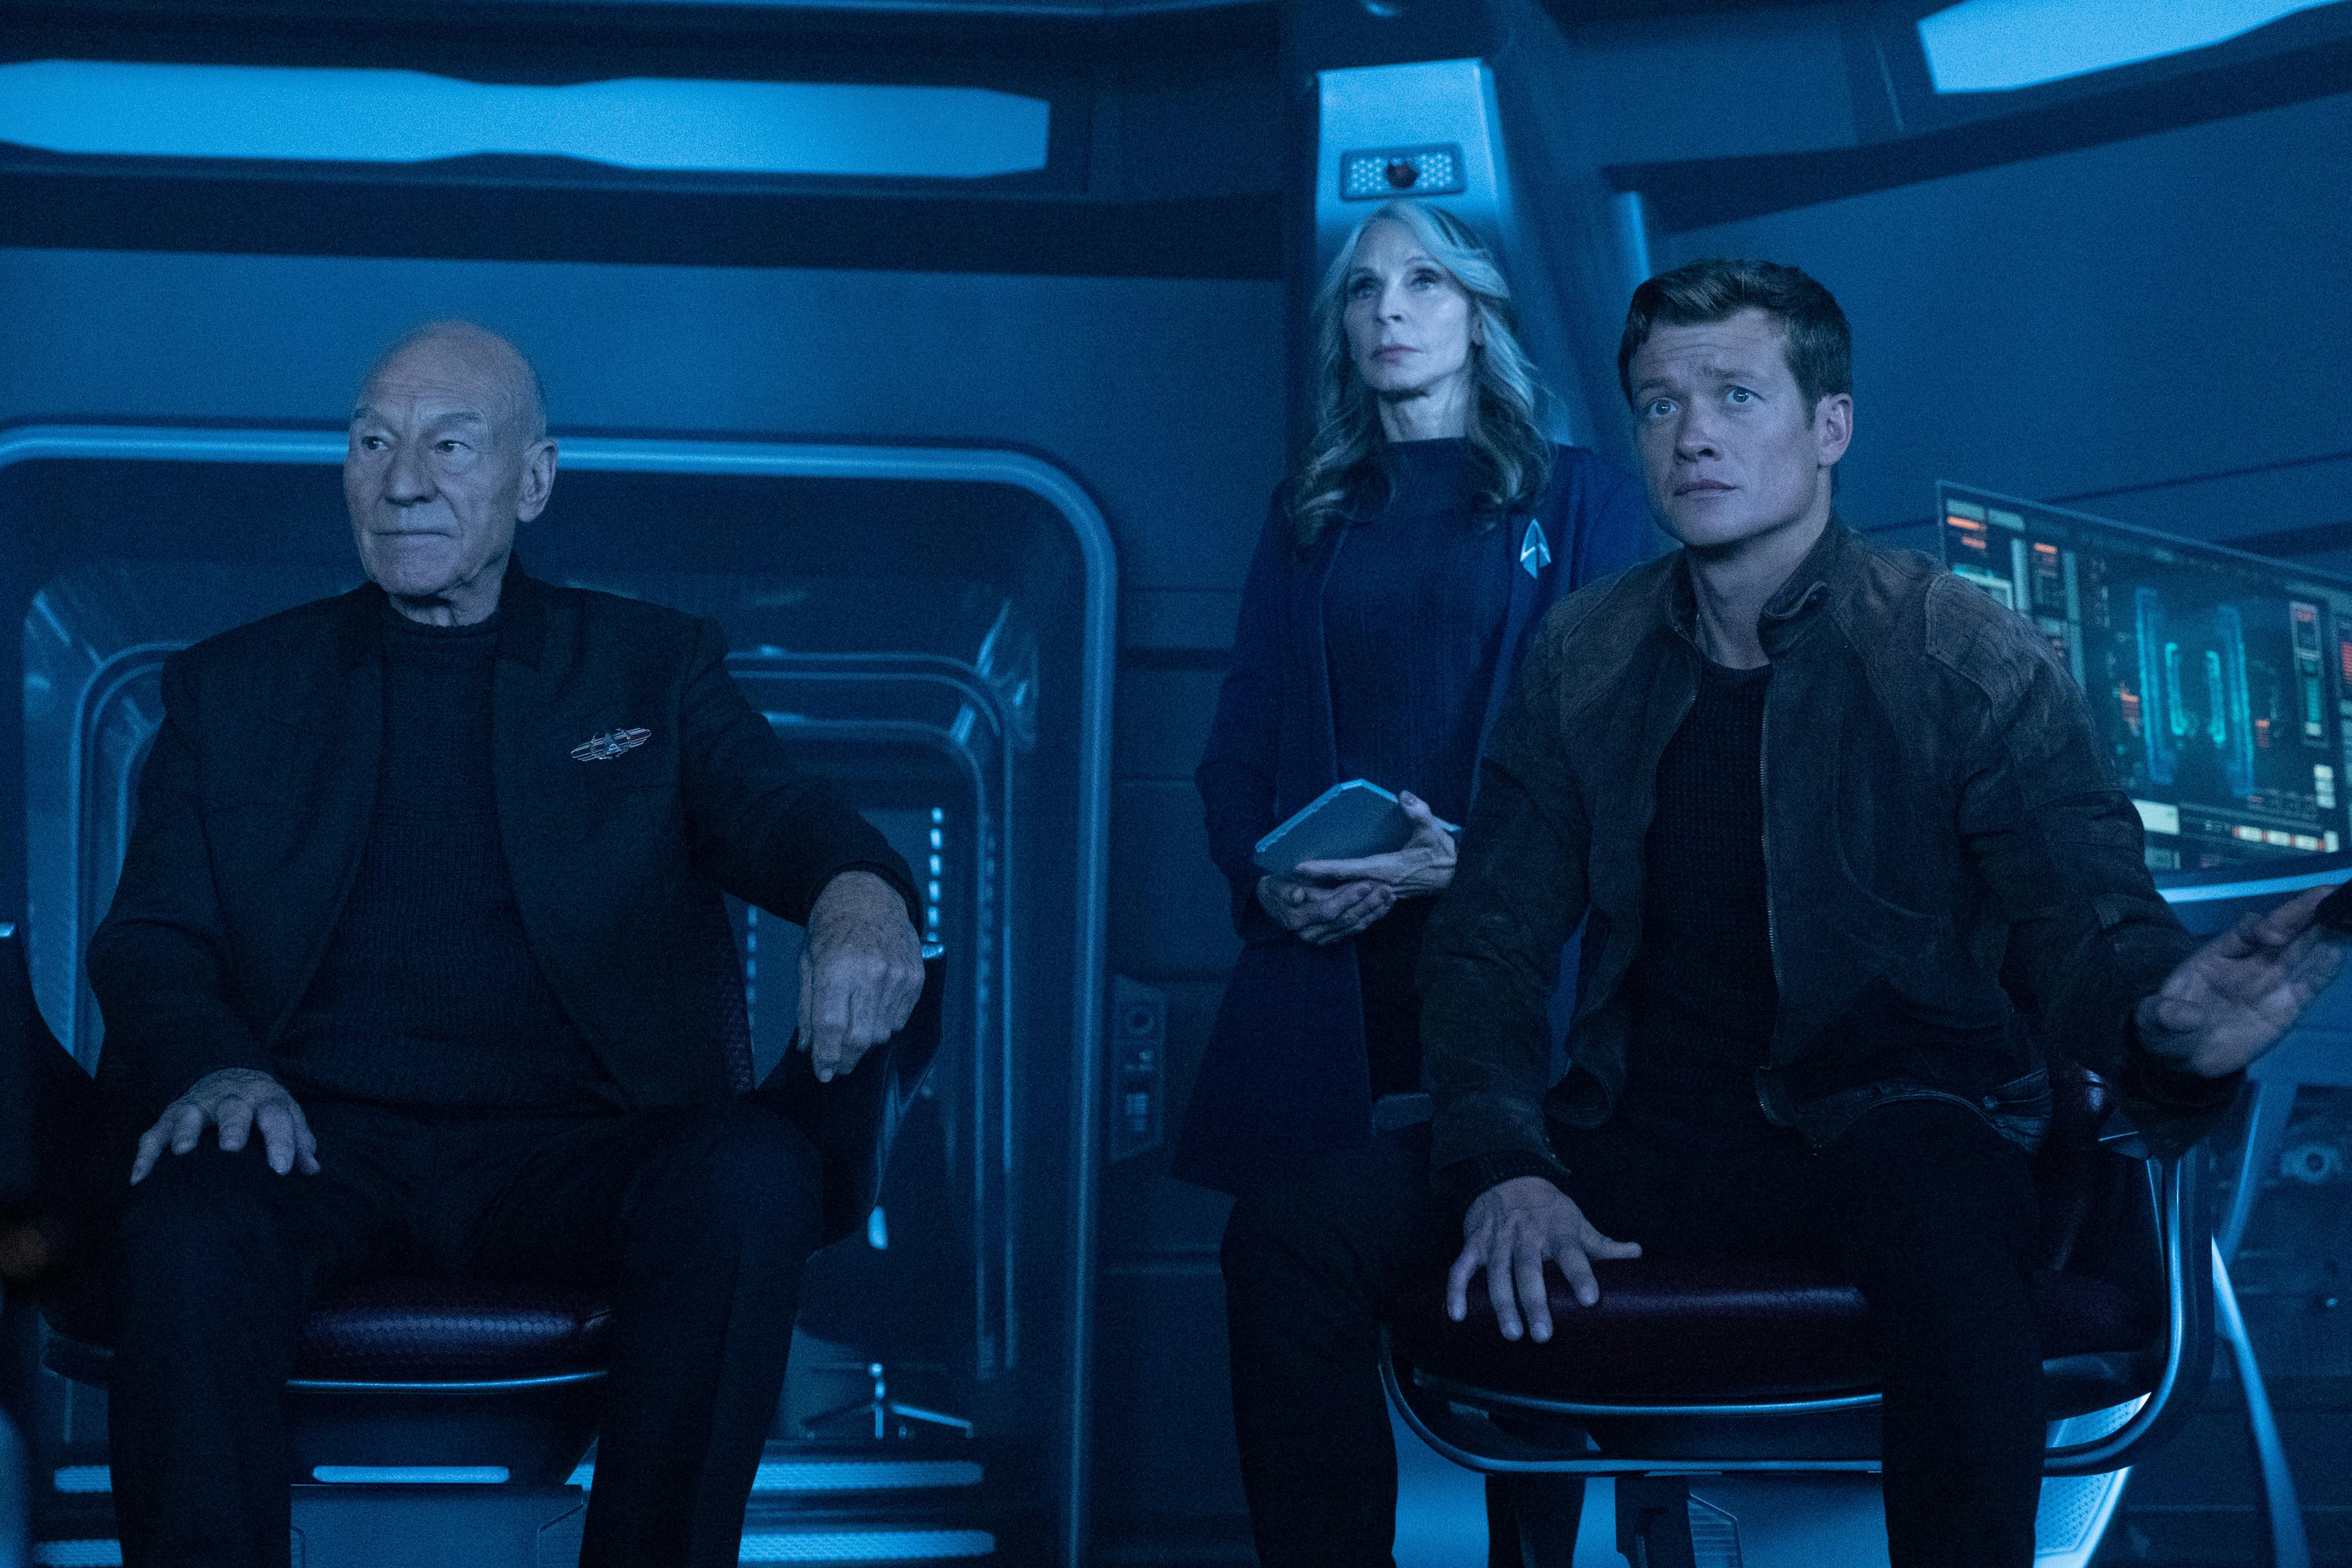 Jean-Luc Picard and Jack Crusher sit on the bridge of the Titan and look ahead as Beverly Crusher stands behind and between them